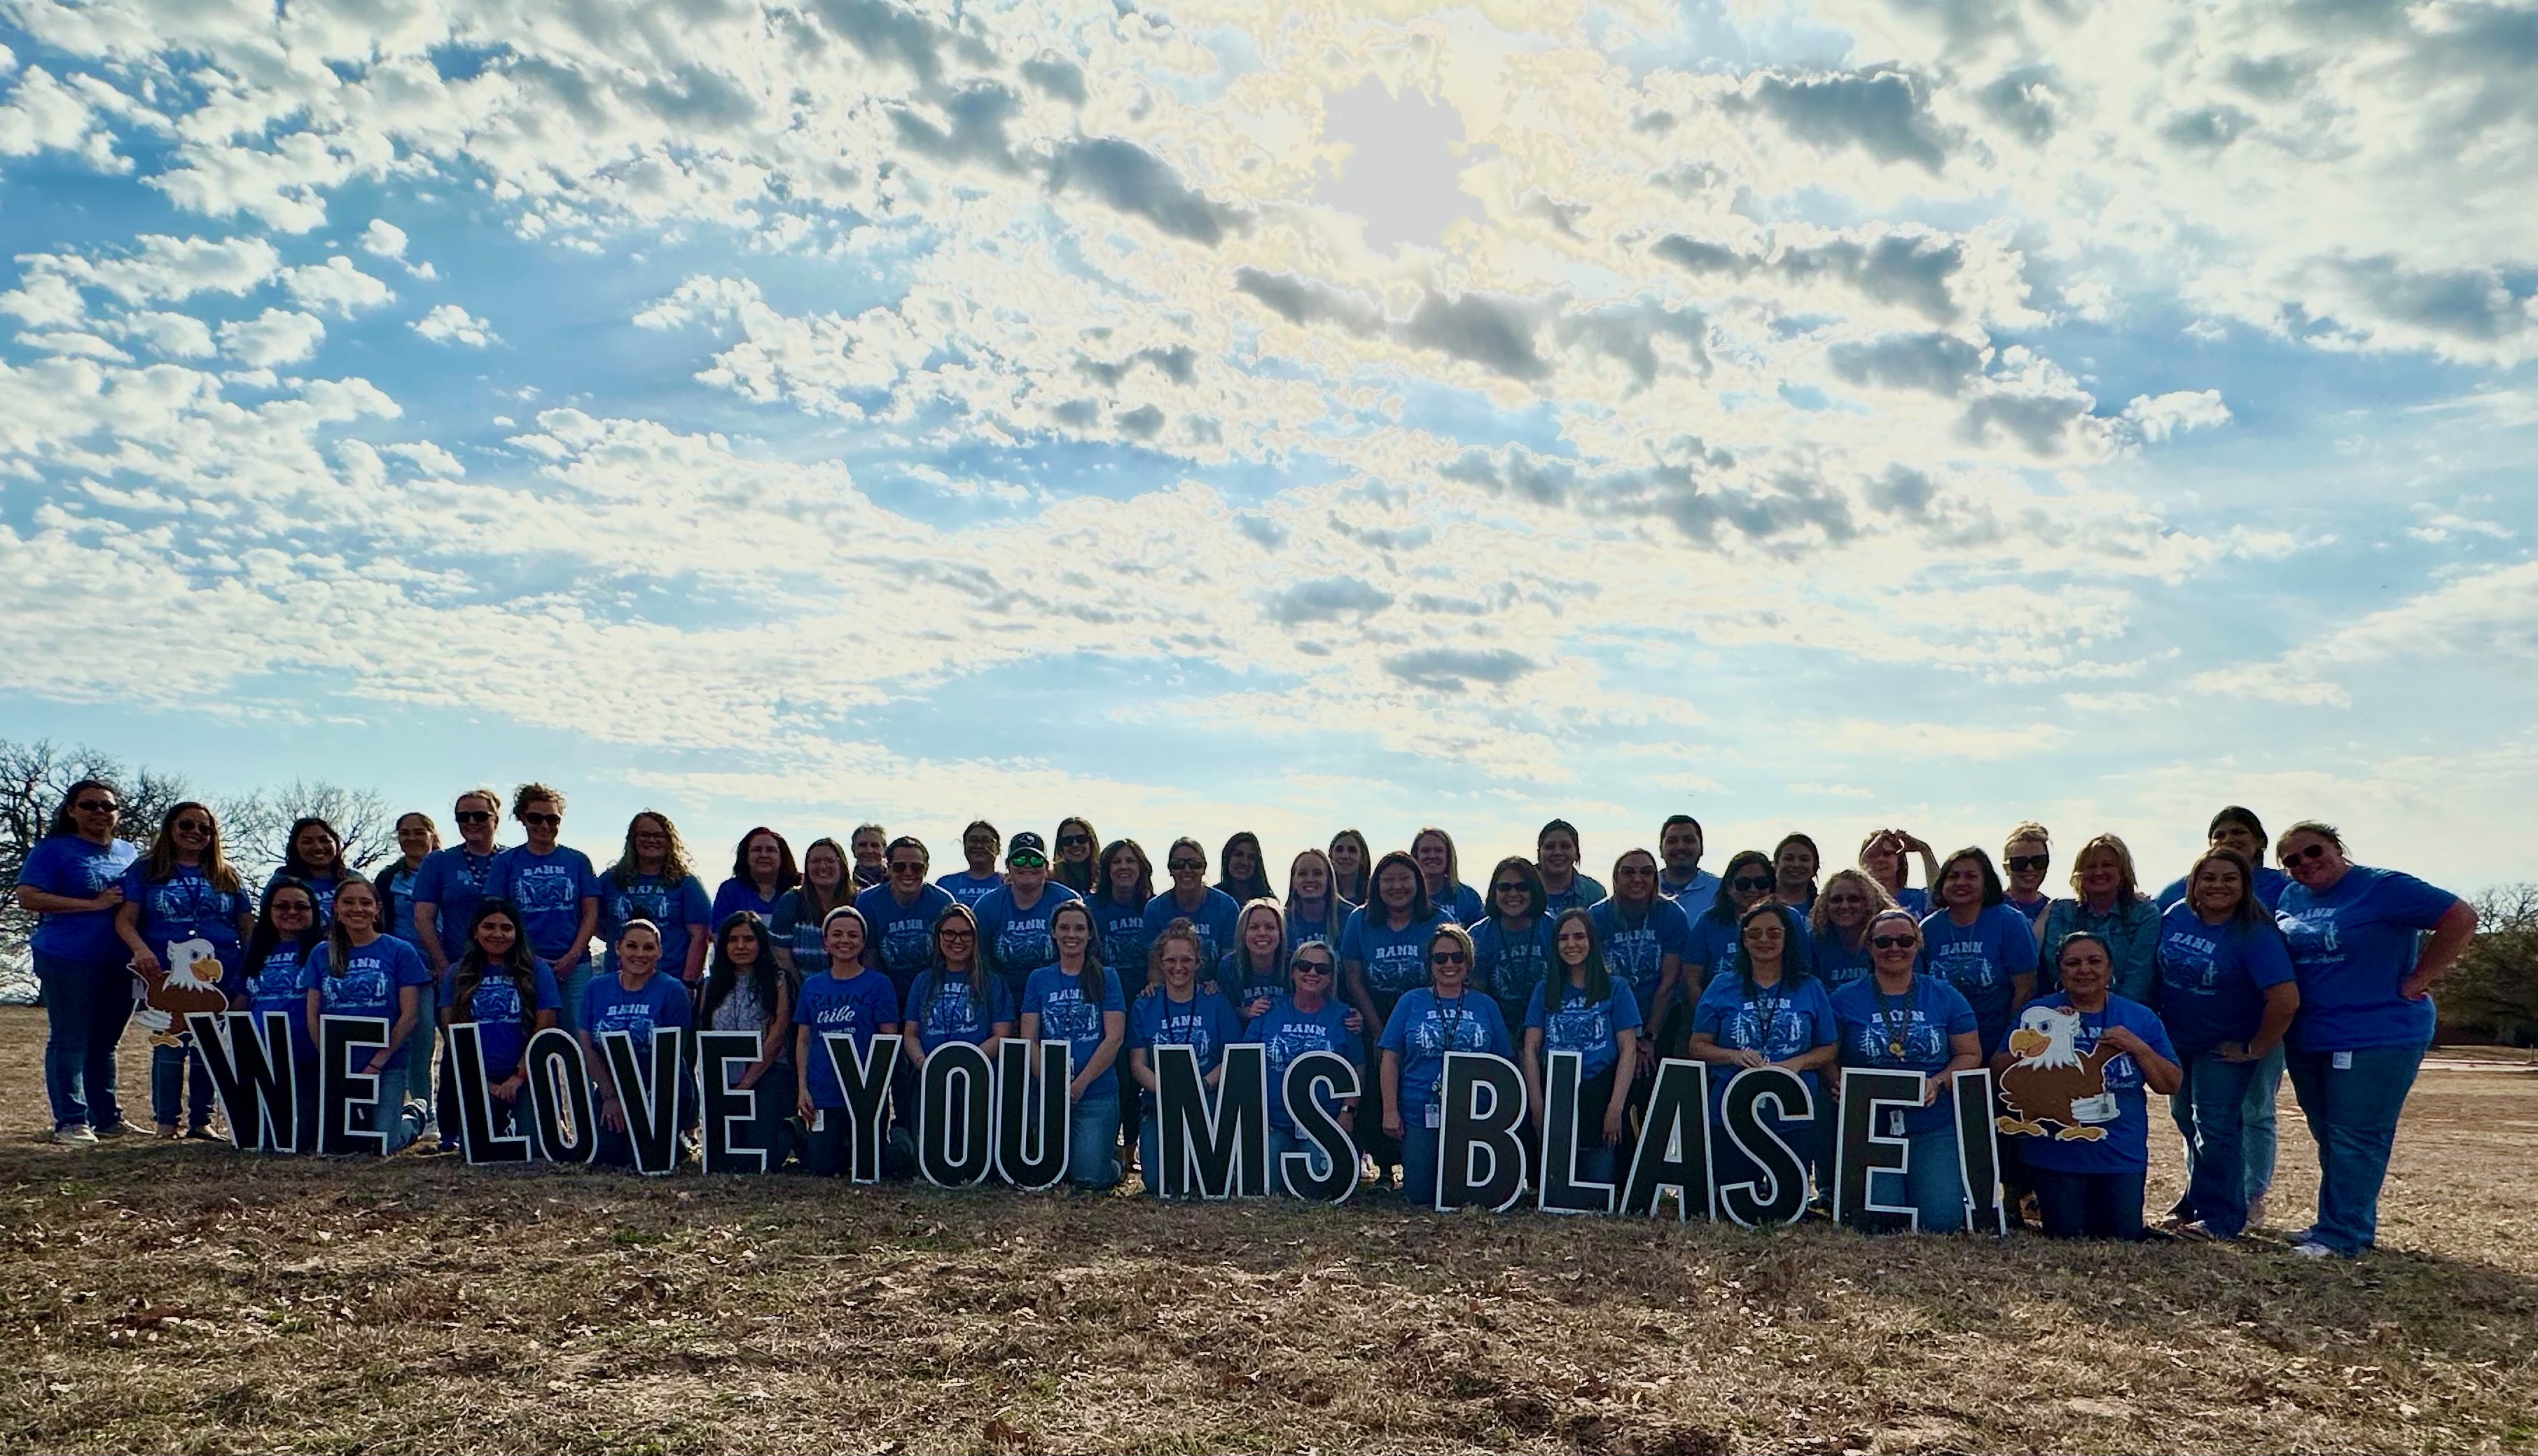 rann staff wearing blue shirts standing in front of the We Love You Ms. Blase yard sign